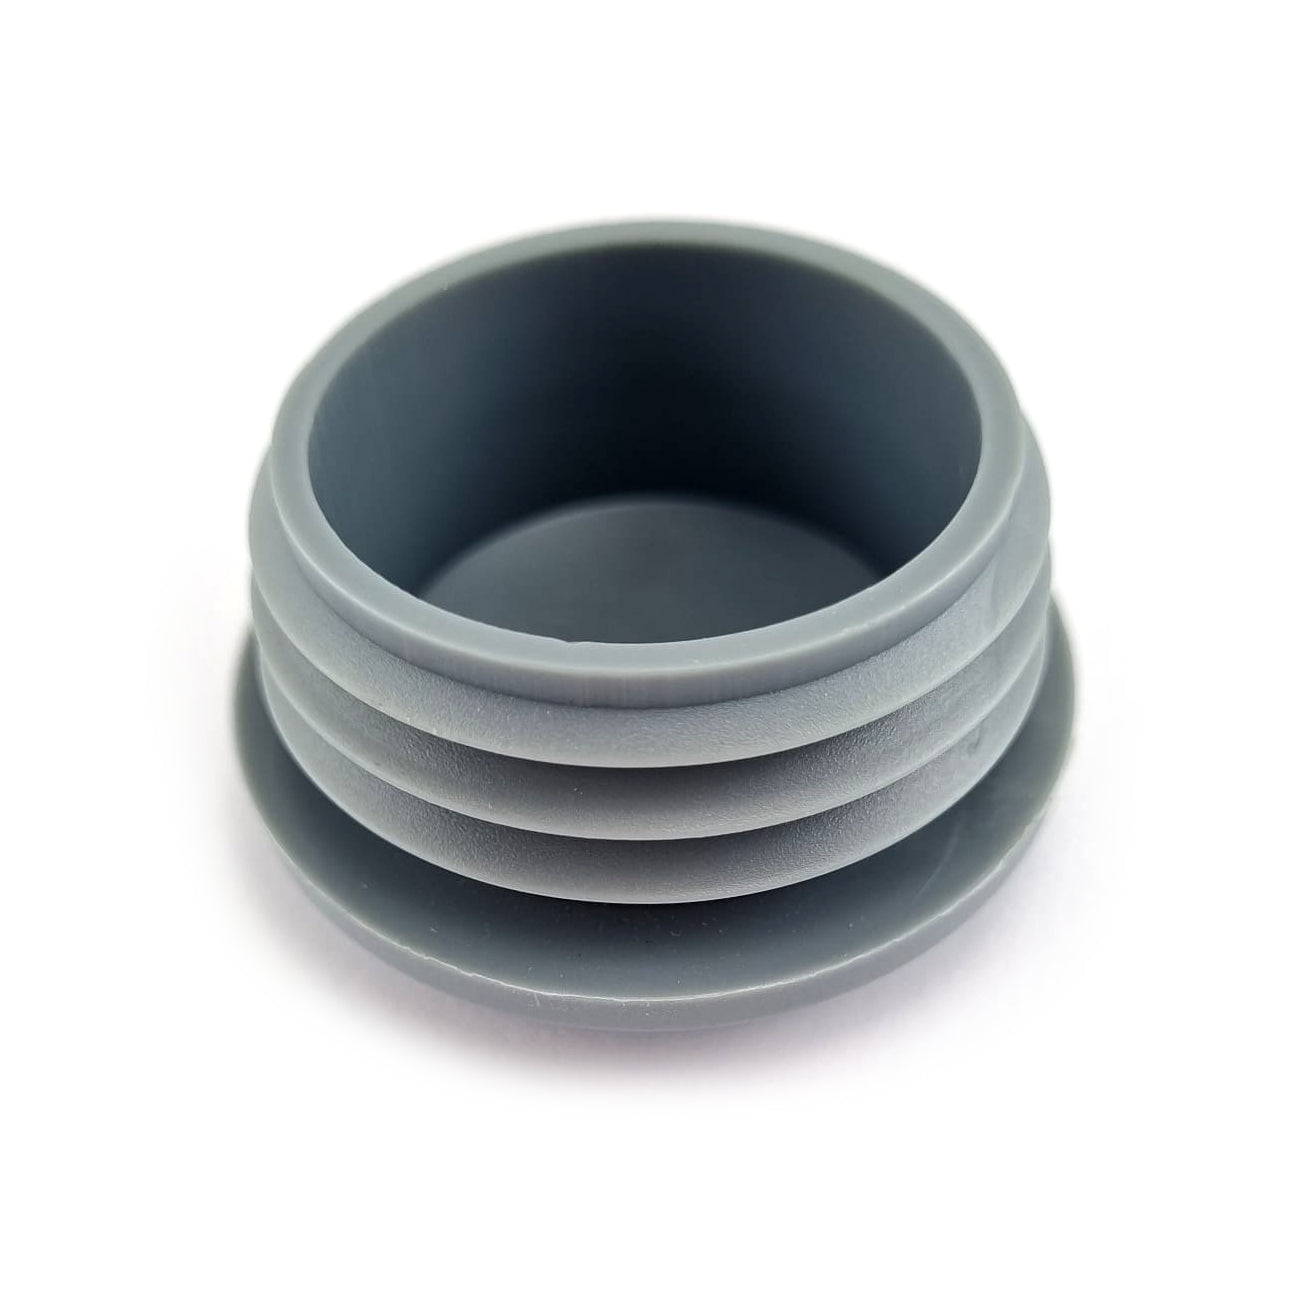 Plastic End Cap for Galvanised Pipe. Interclamp Code 133. Shop rail & pipe fittings online chain.com.au